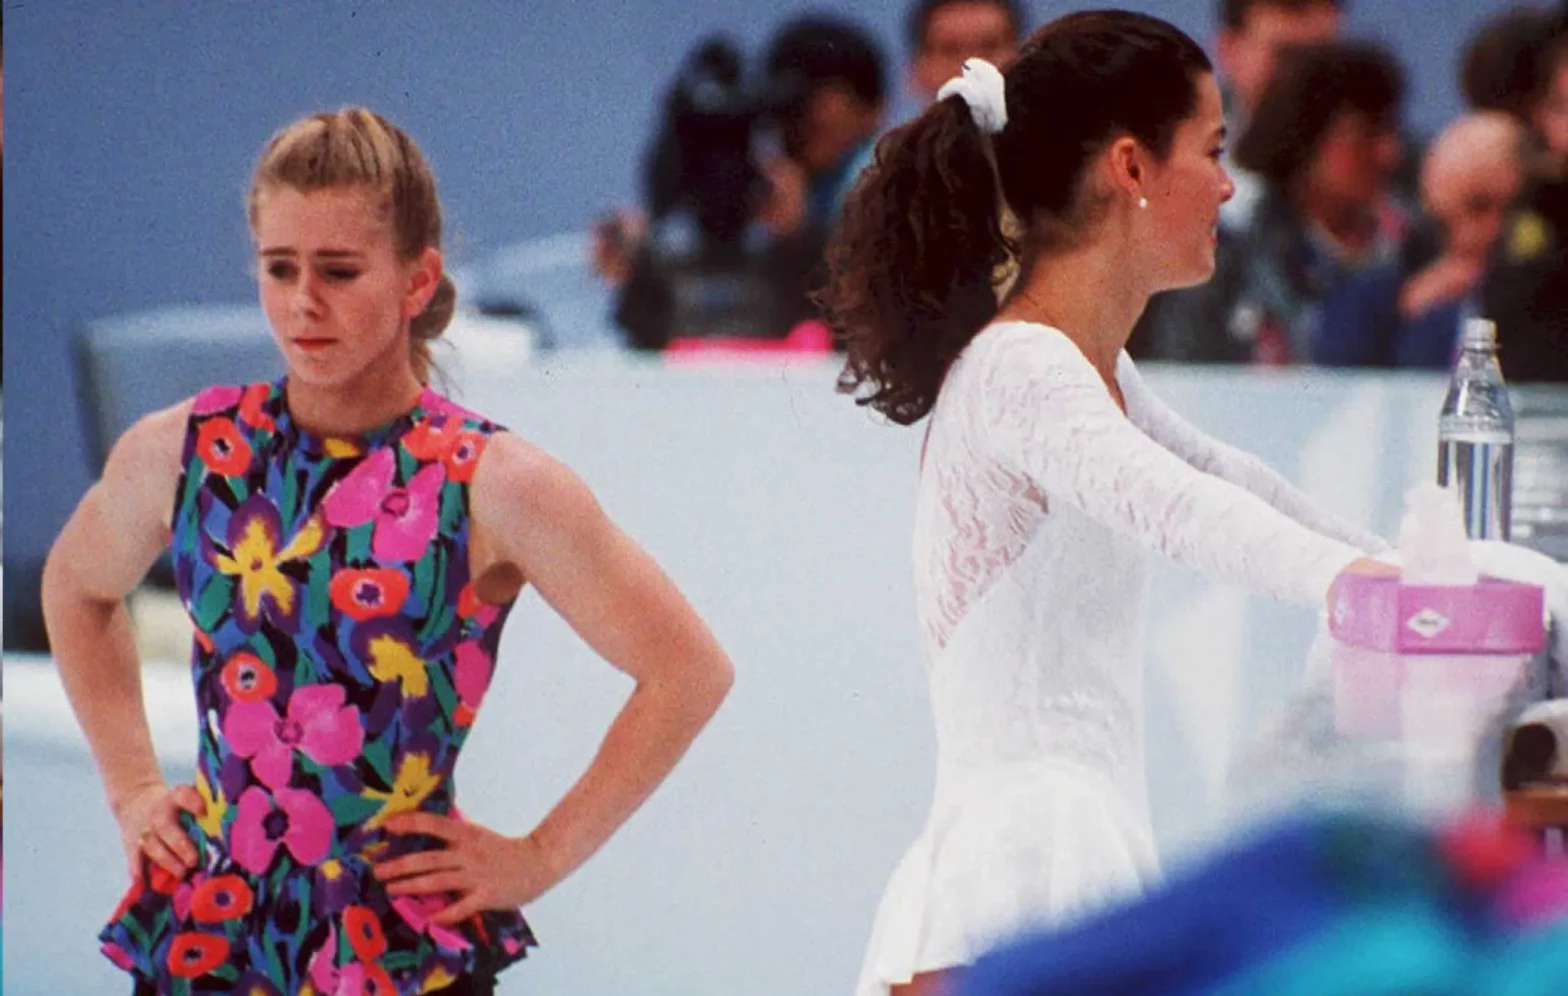 Tonya Harding and Nancy Kerrigan on the ice at the Winter Olympc Games